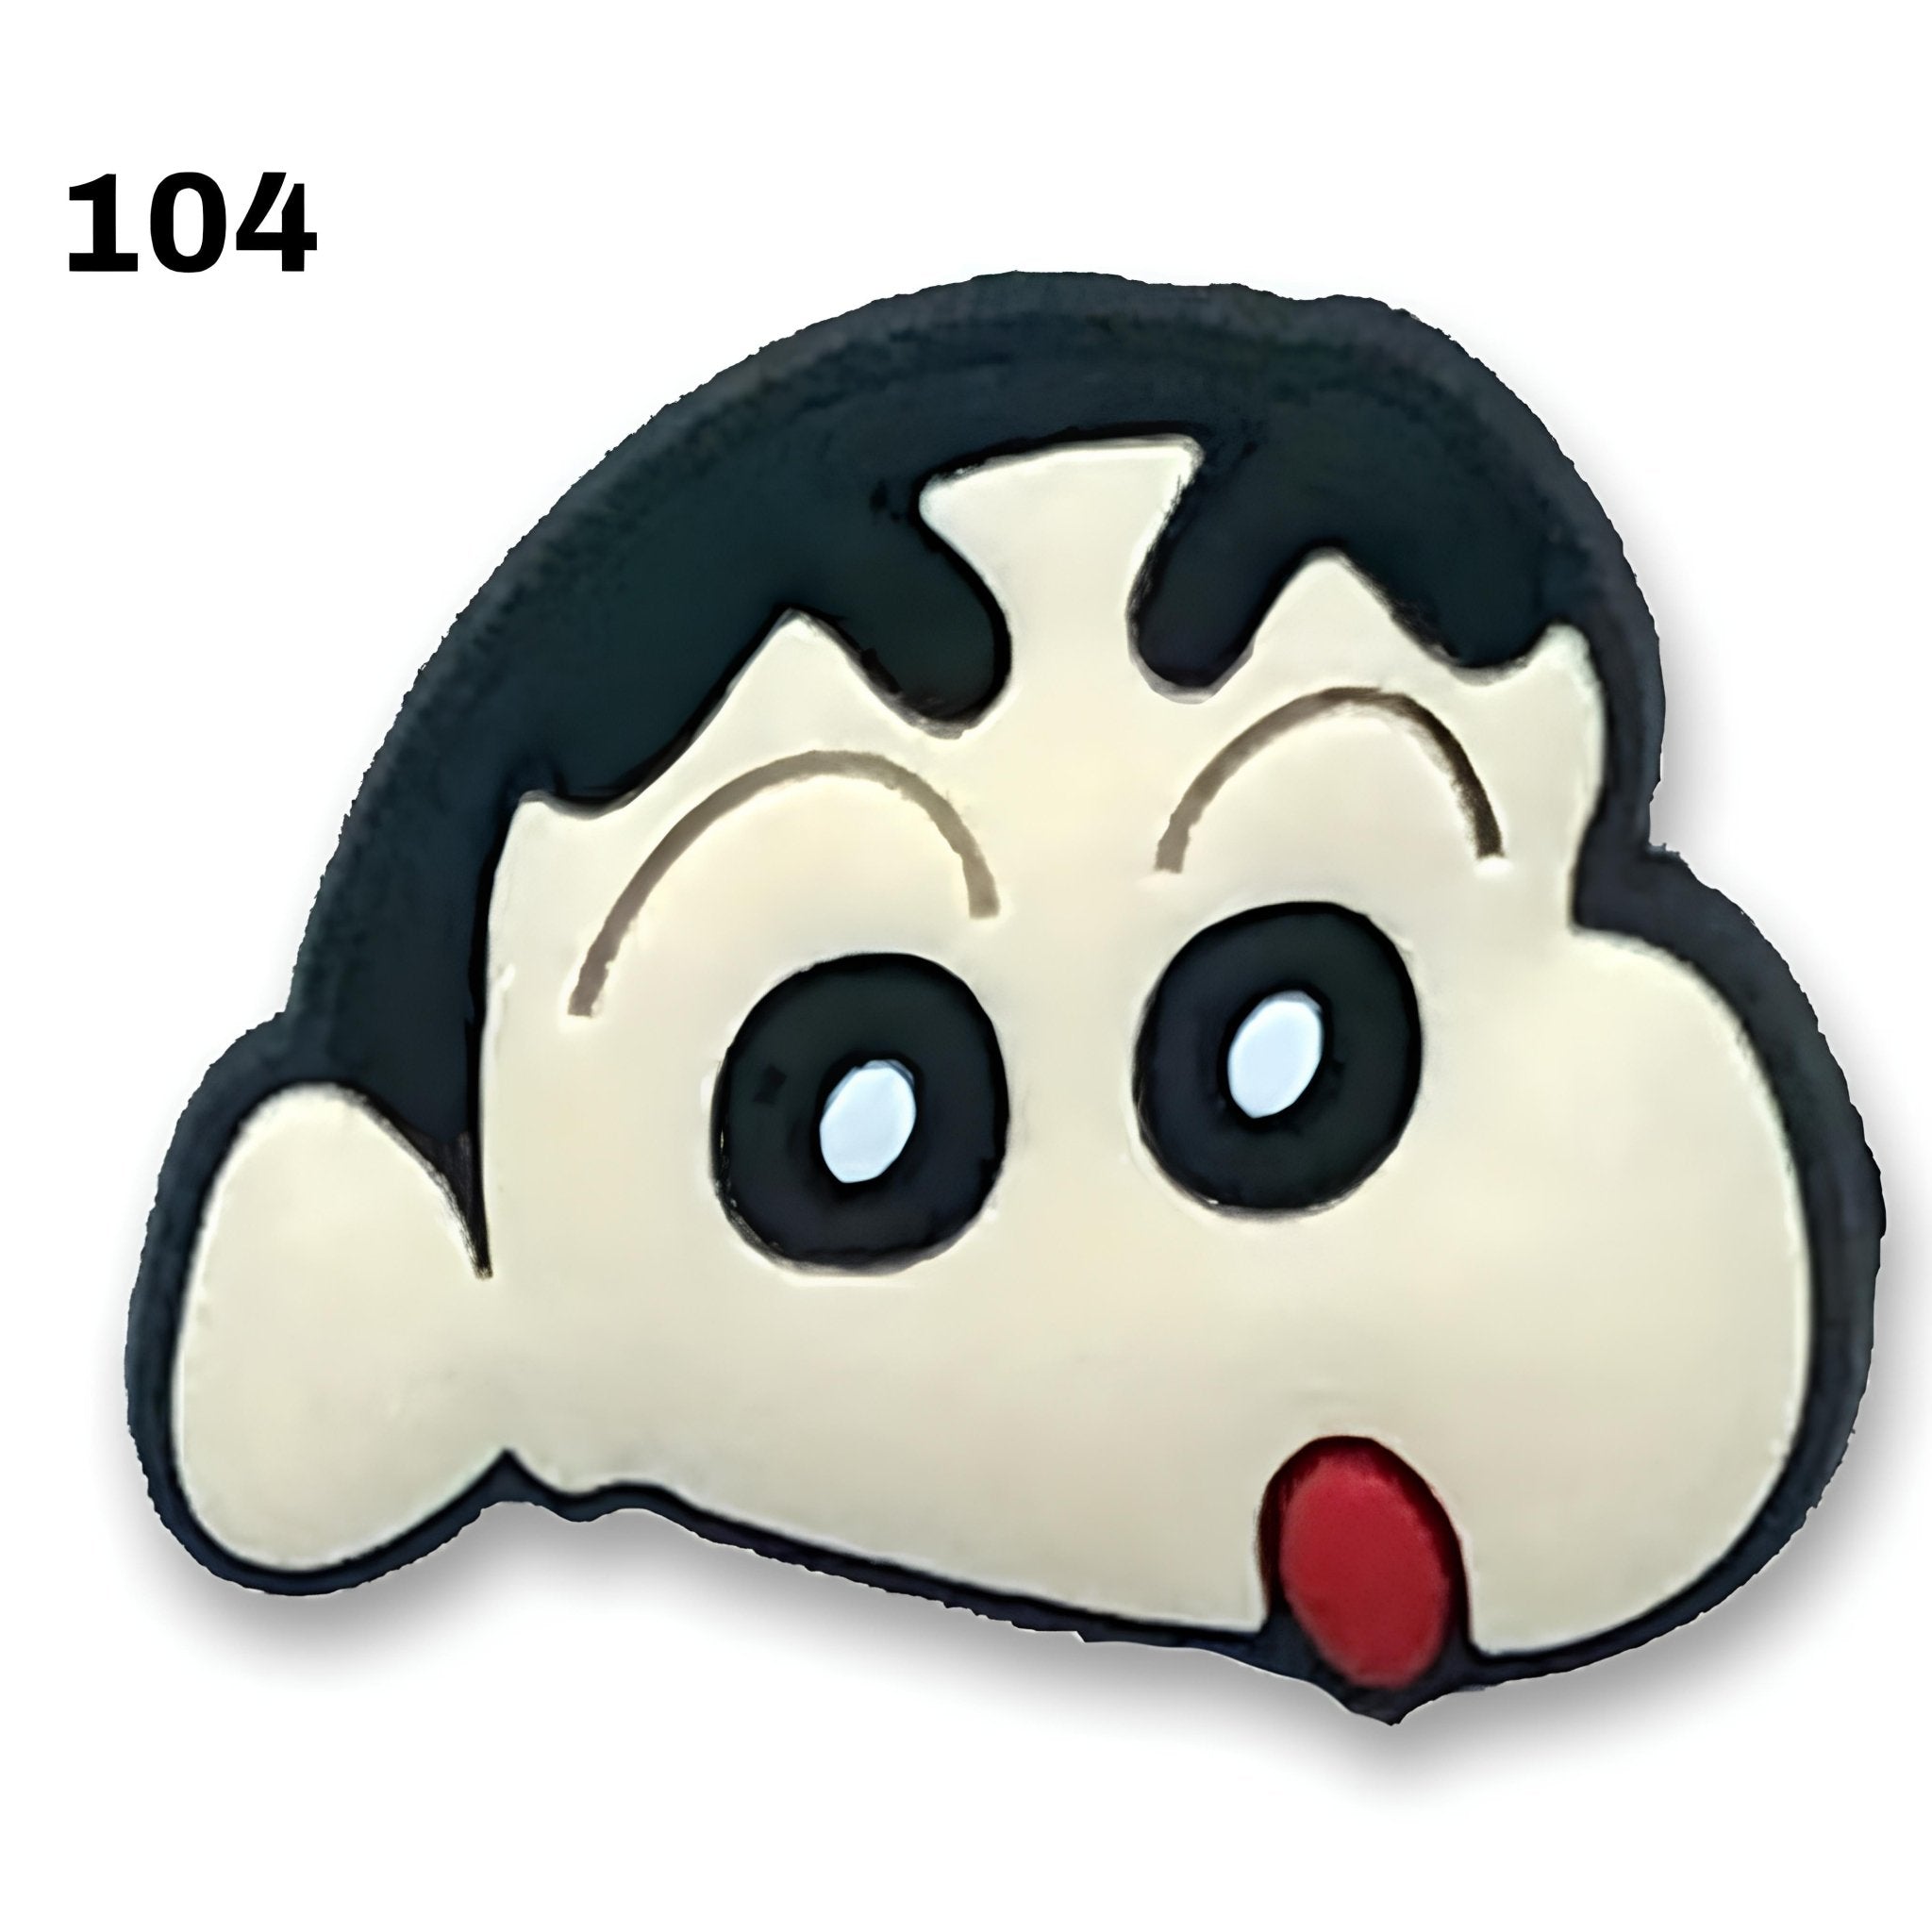 "Shinchan Face Charm 😄👦: Playful Expression!" - Questsole